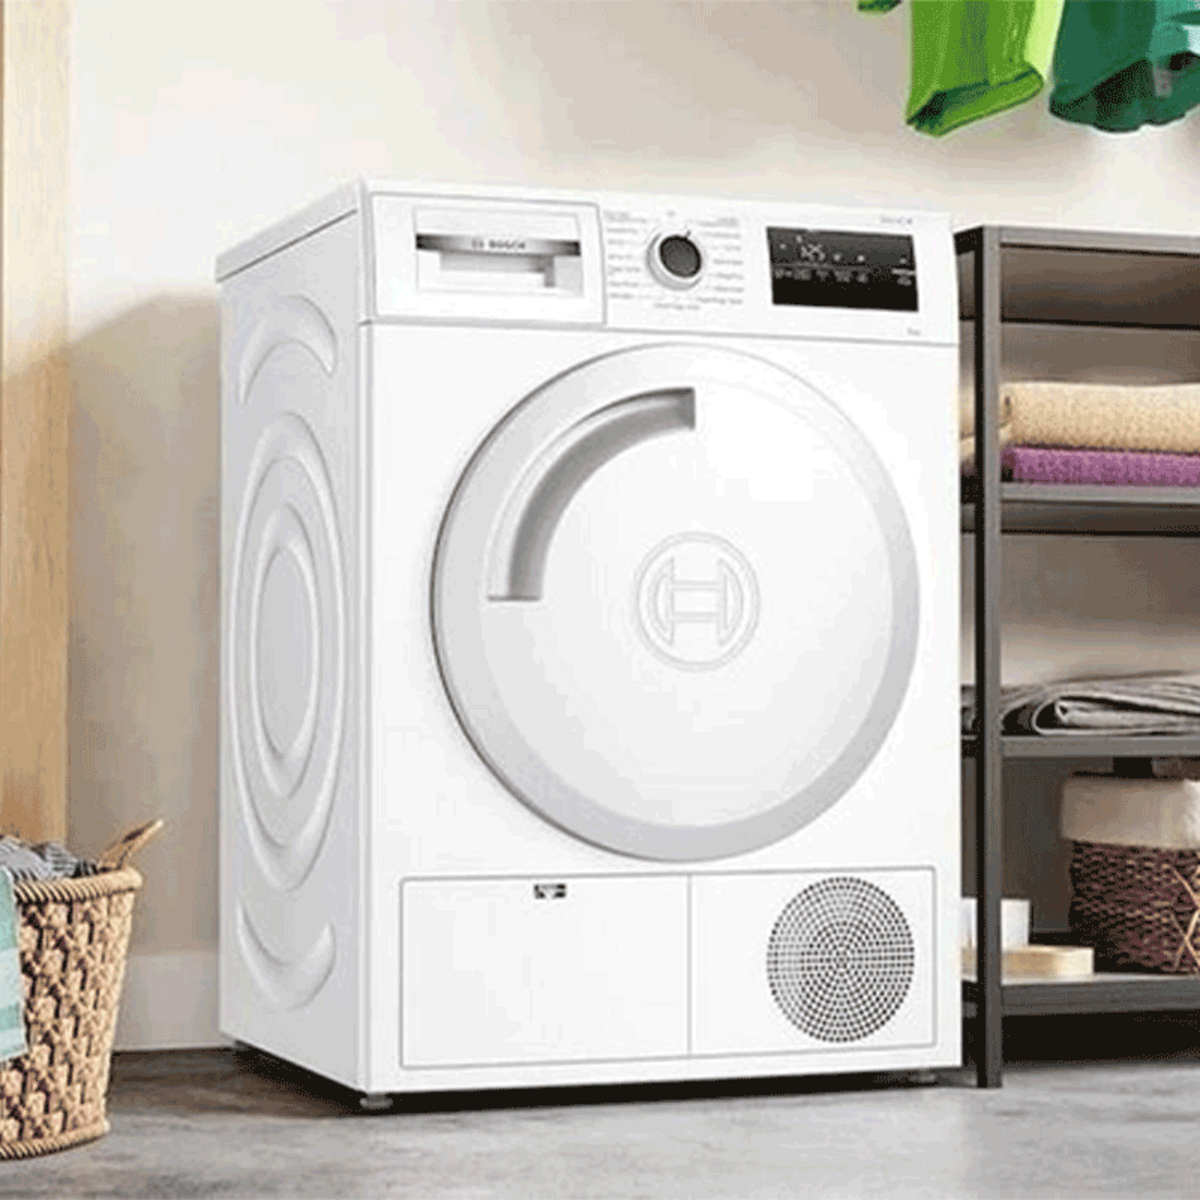 Bosch WTN83202GB B rated 8kg Condenser Tumble Dryer - White